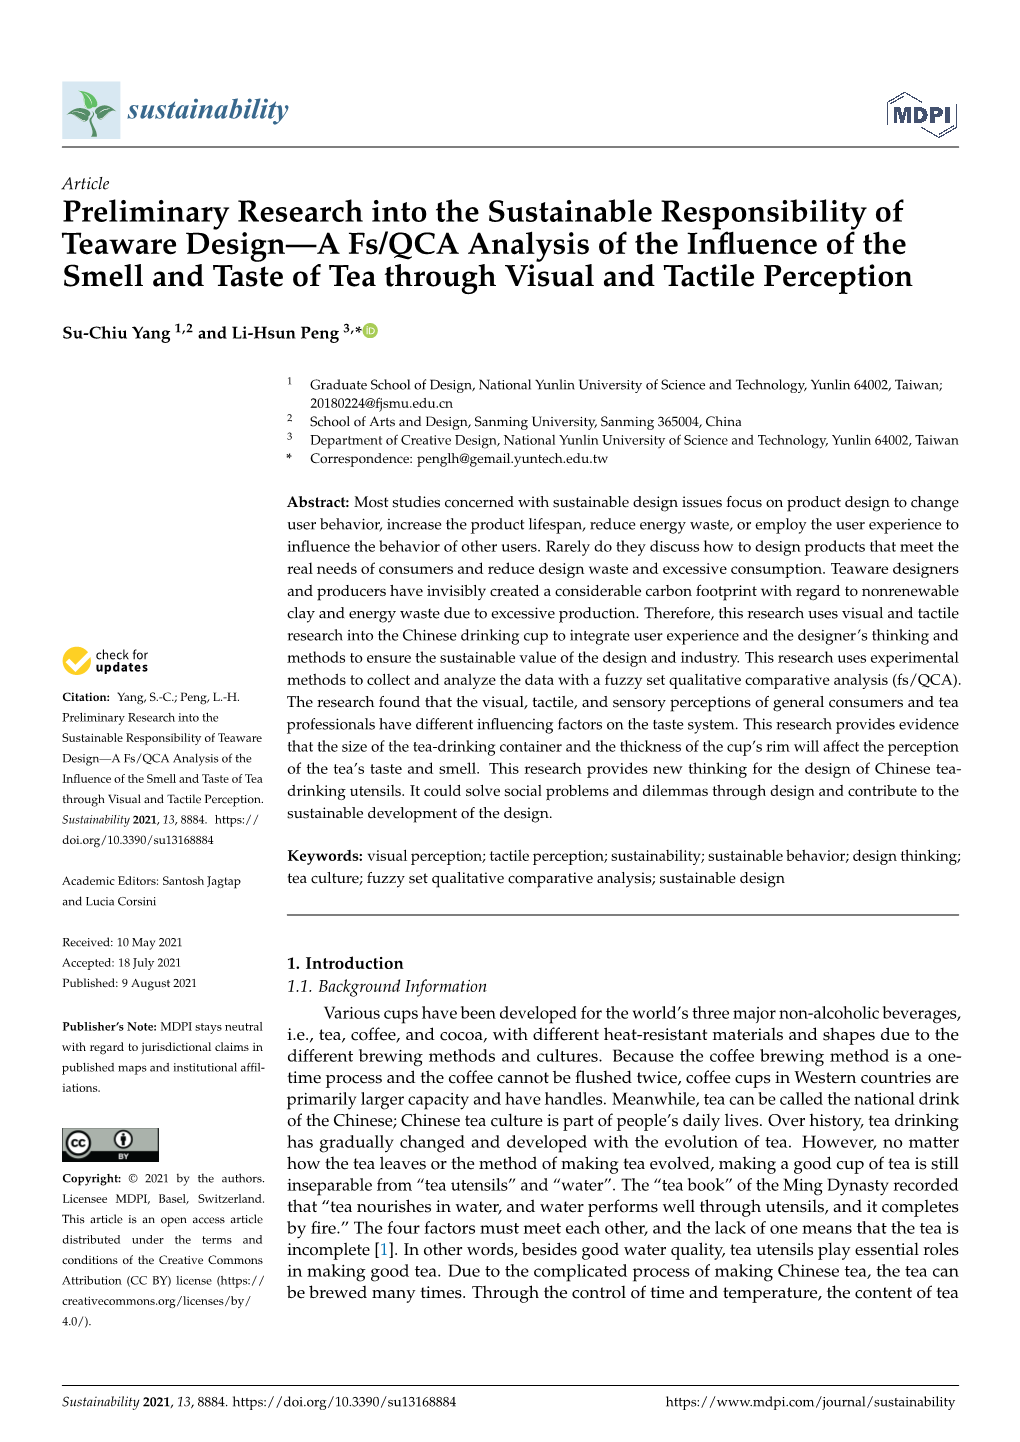 Preliminary Research Into the Sustainable Responsibility of Teaware Design—A Fs/QCA Analysis of the Influence of the Smell